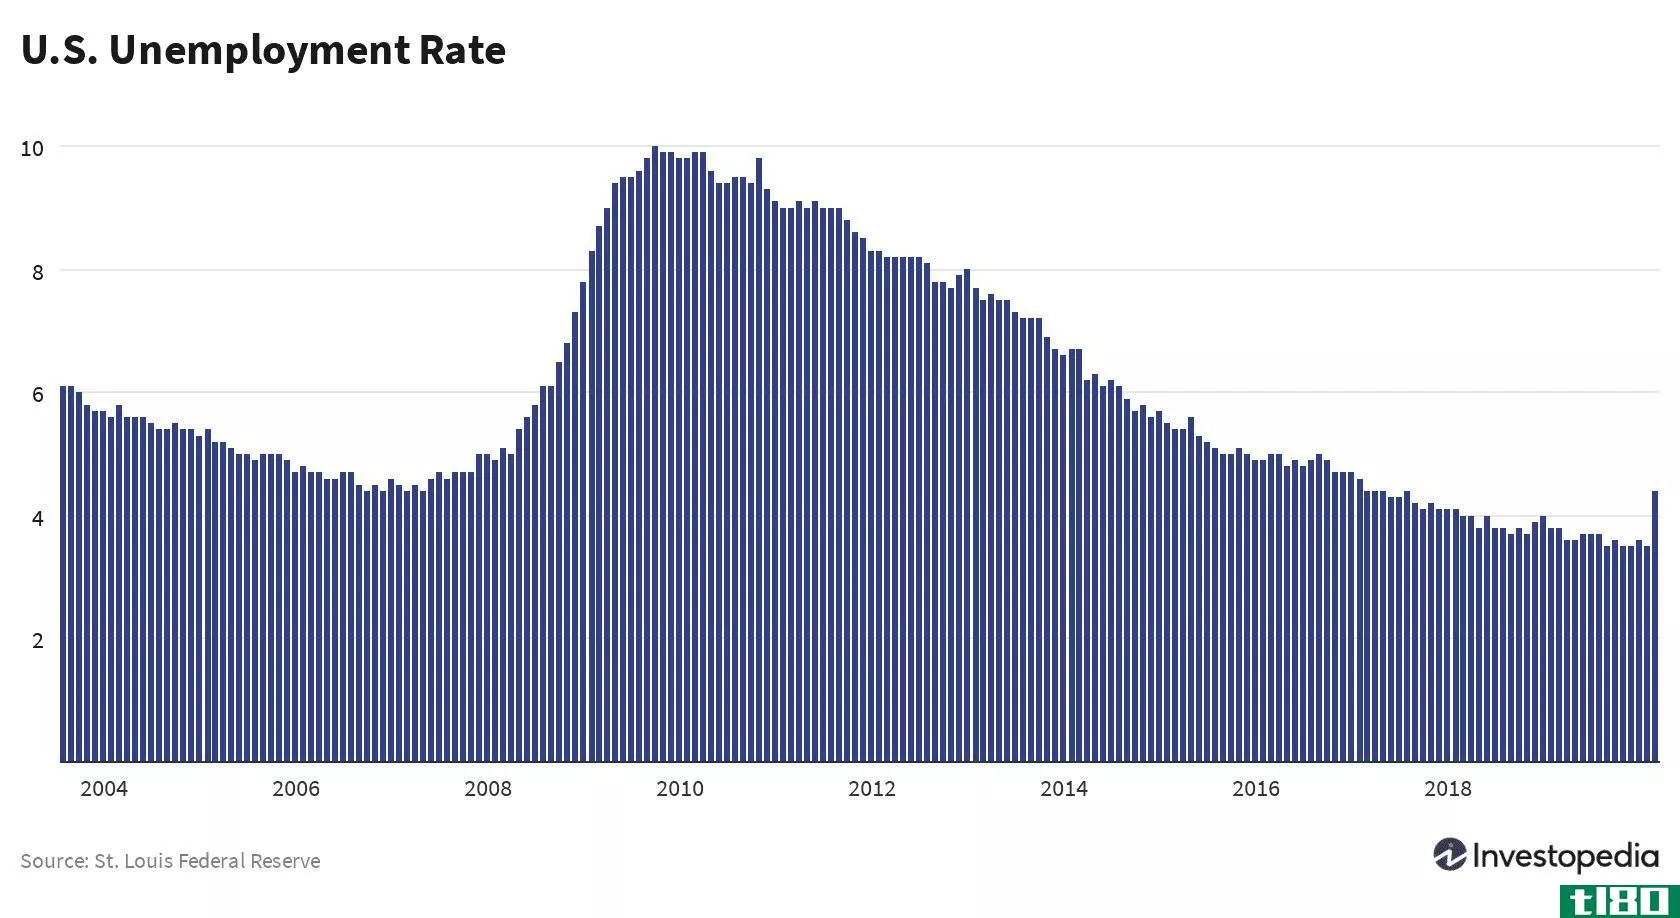 U.S. Unemployment Rate (past 20 years)